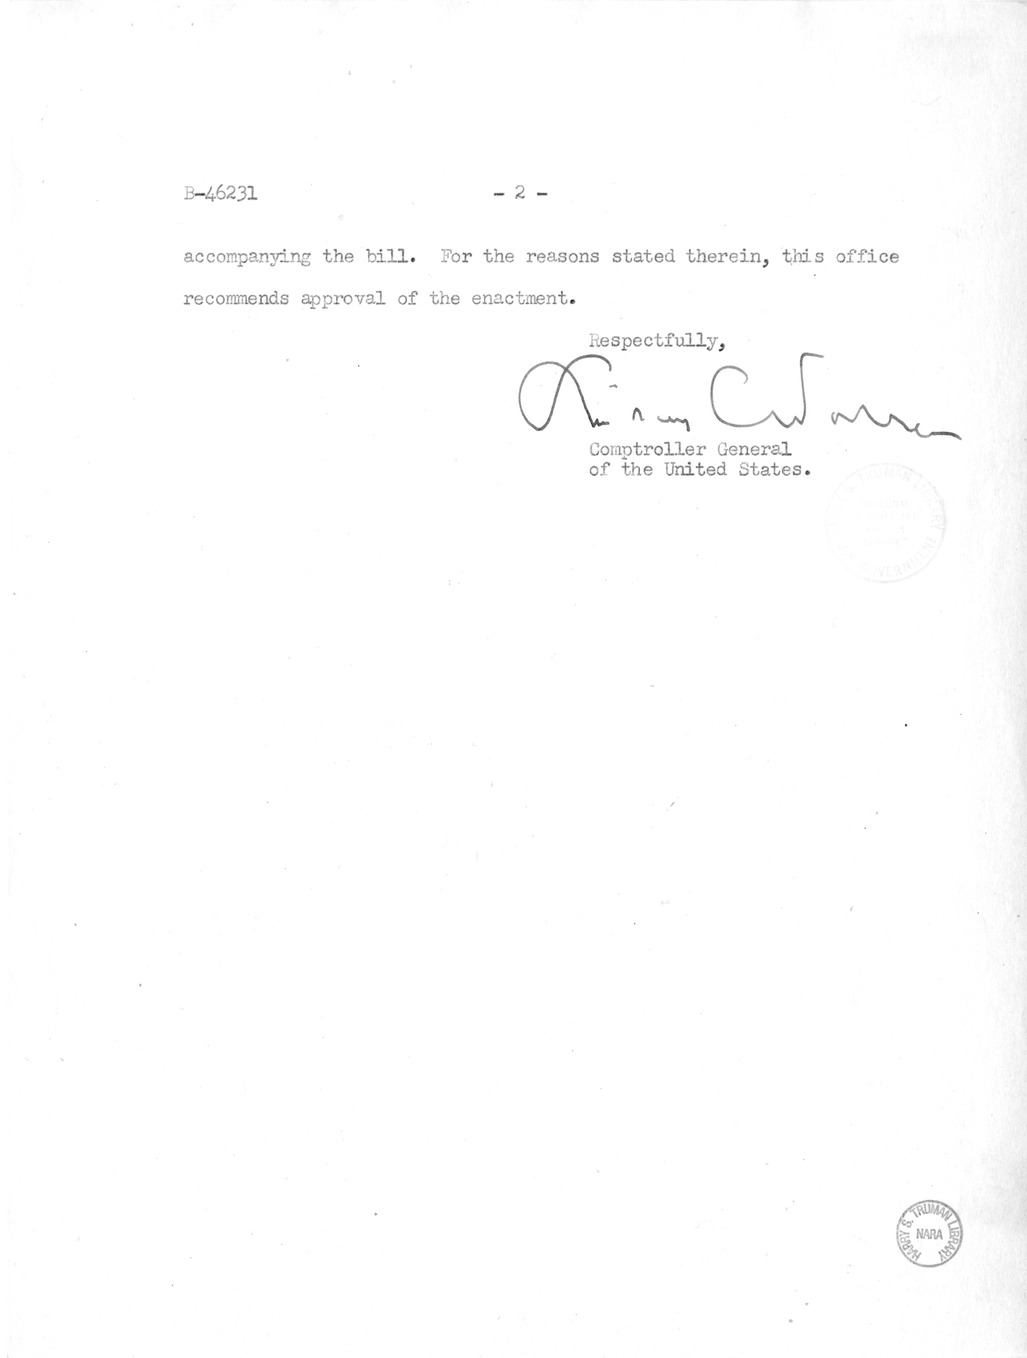 Memorandum from Frederick J. Bailey to M. C. Latta, S. 514, For the Relief of the Baldwin Brothers Paving Company, with Attachments